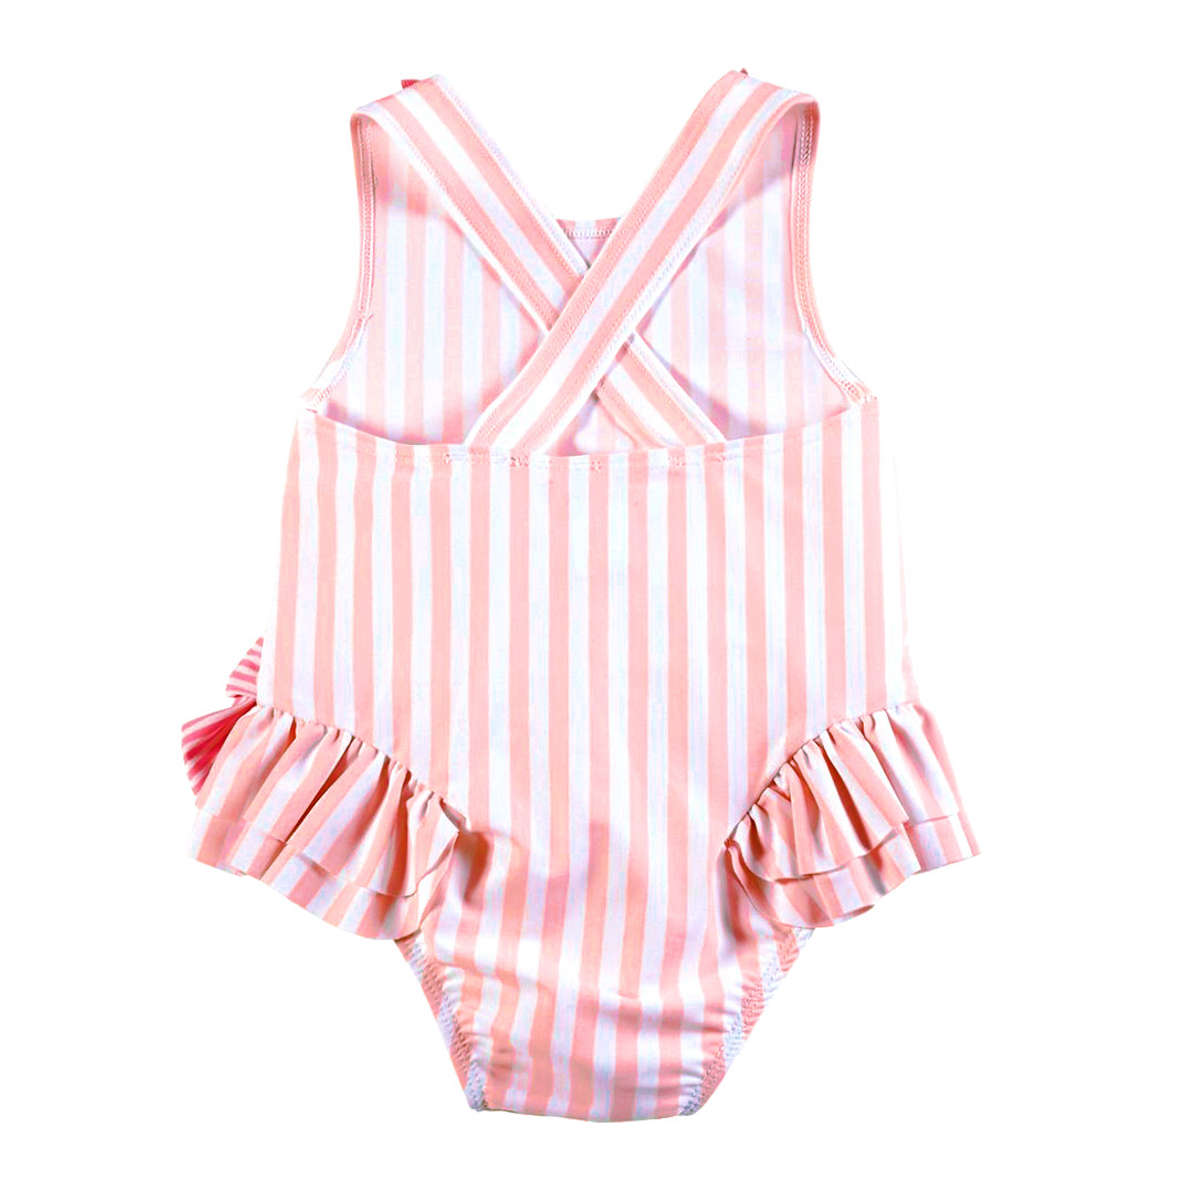 Personalized Pink Baby Swim Suit